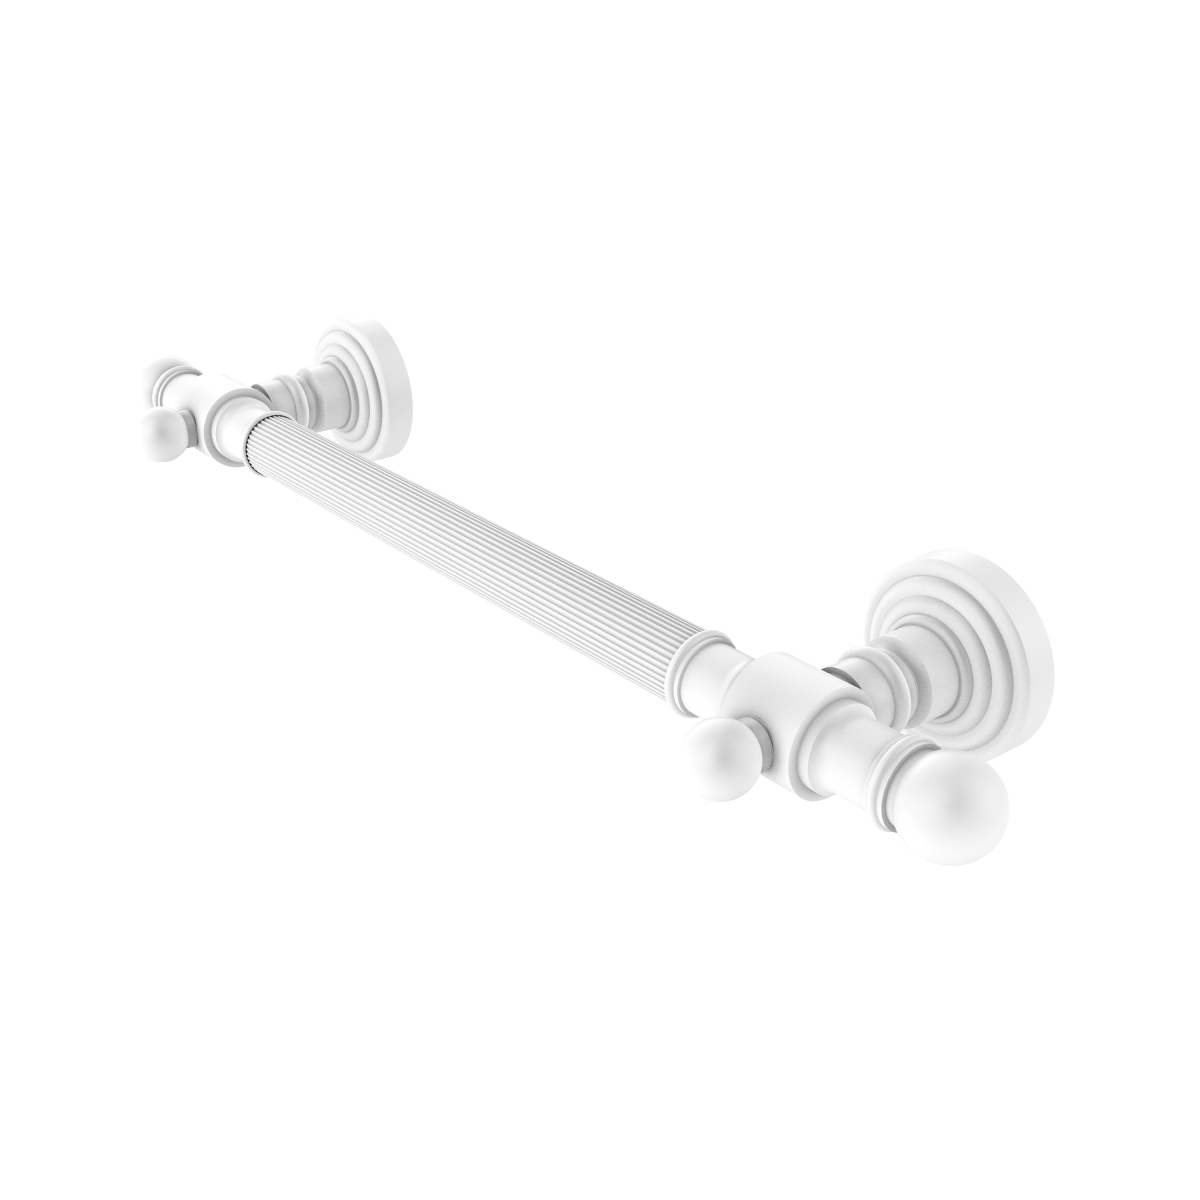 Picture of Allied Brass WP-GRR-36-WHM 36 in. Reeded Grab Bar, Matte White - 3.5 x 42 x 36 in.